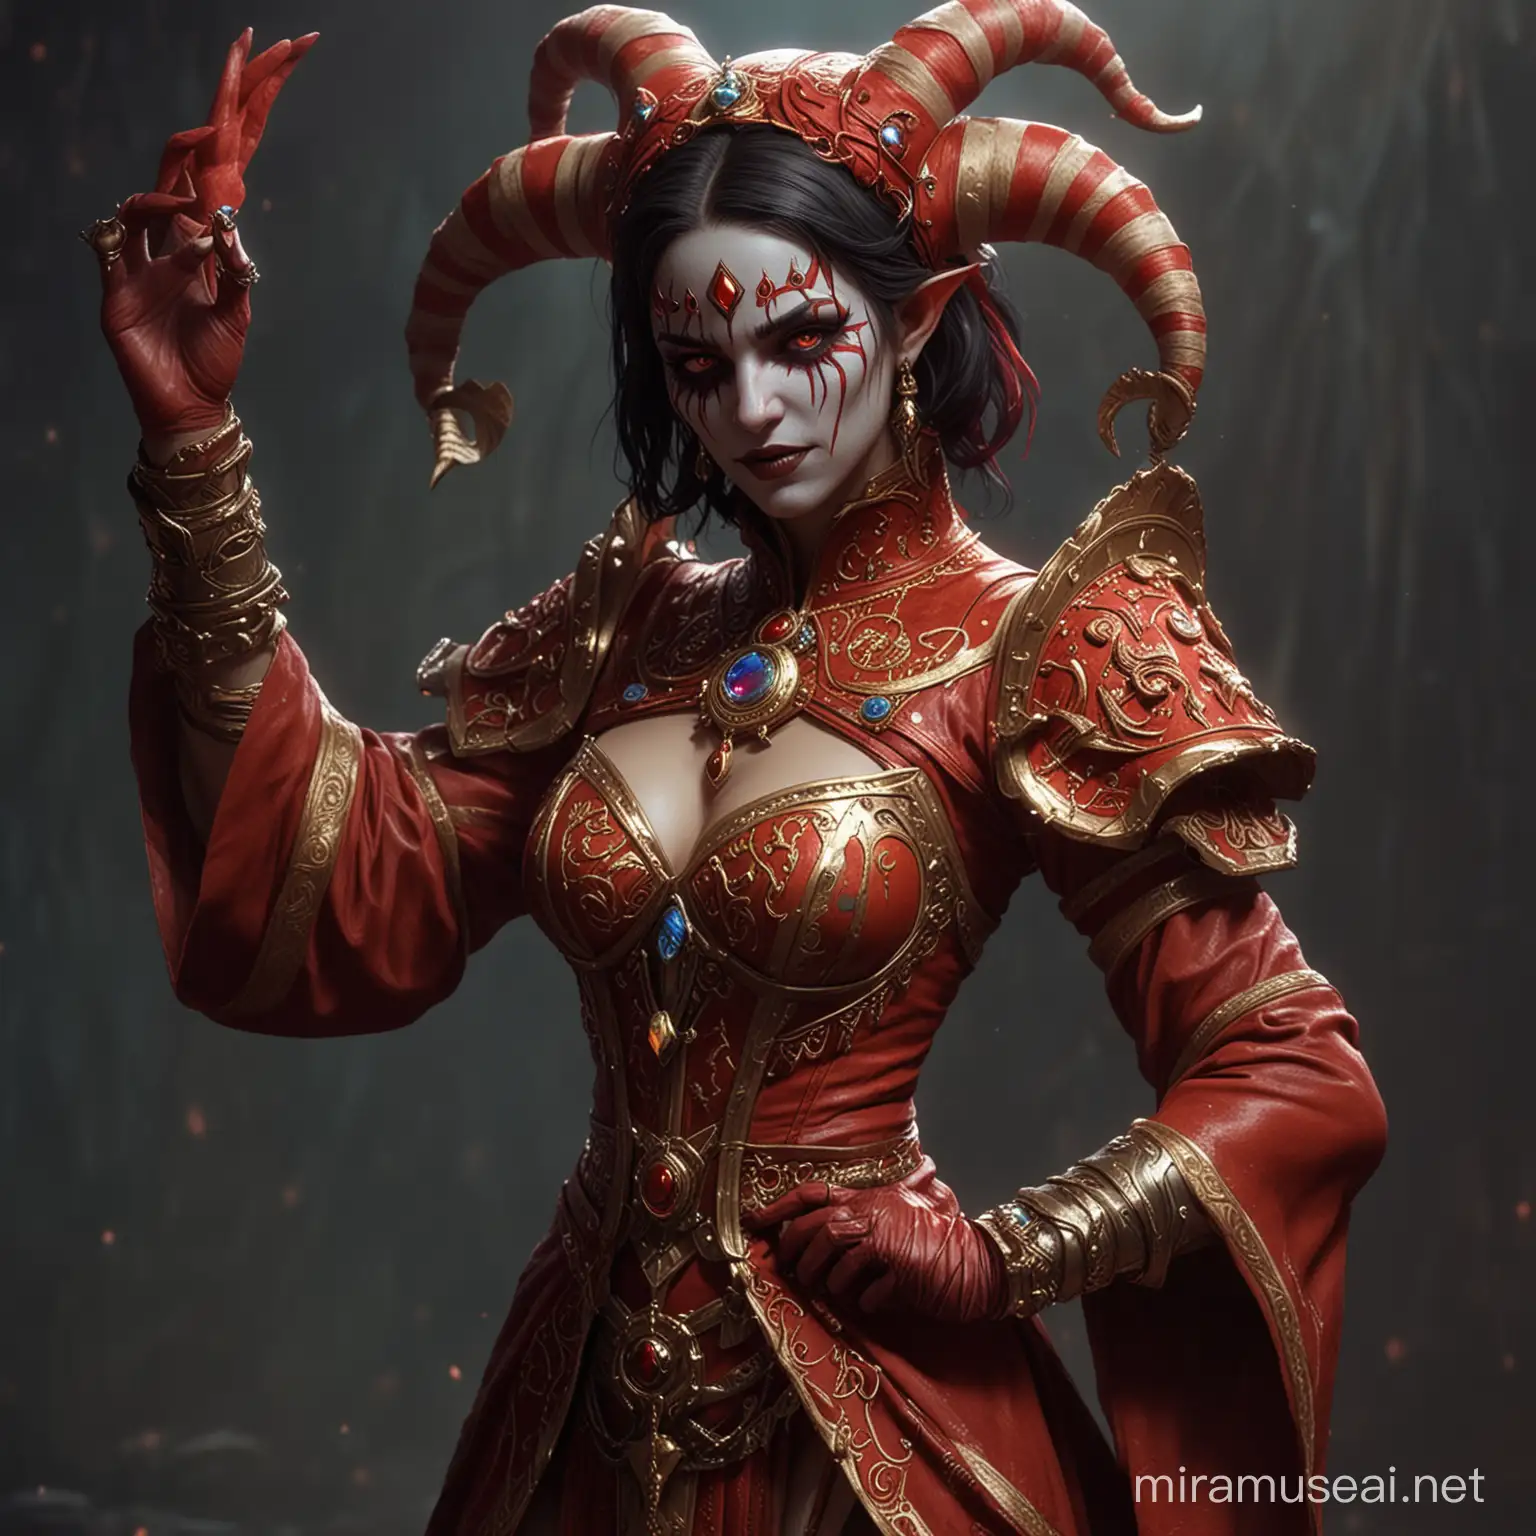 eerie, horror, cosmic robe, circus themed, Atziri from the path of exile, fantasy, deity, red colors, two faced goddess, many limbs, different emotions, elation, jester, trickster pose, menacing, world of warcraft styled, female obscured figure, realistic hands, holding circus-like props, masked face, portrait of goddess